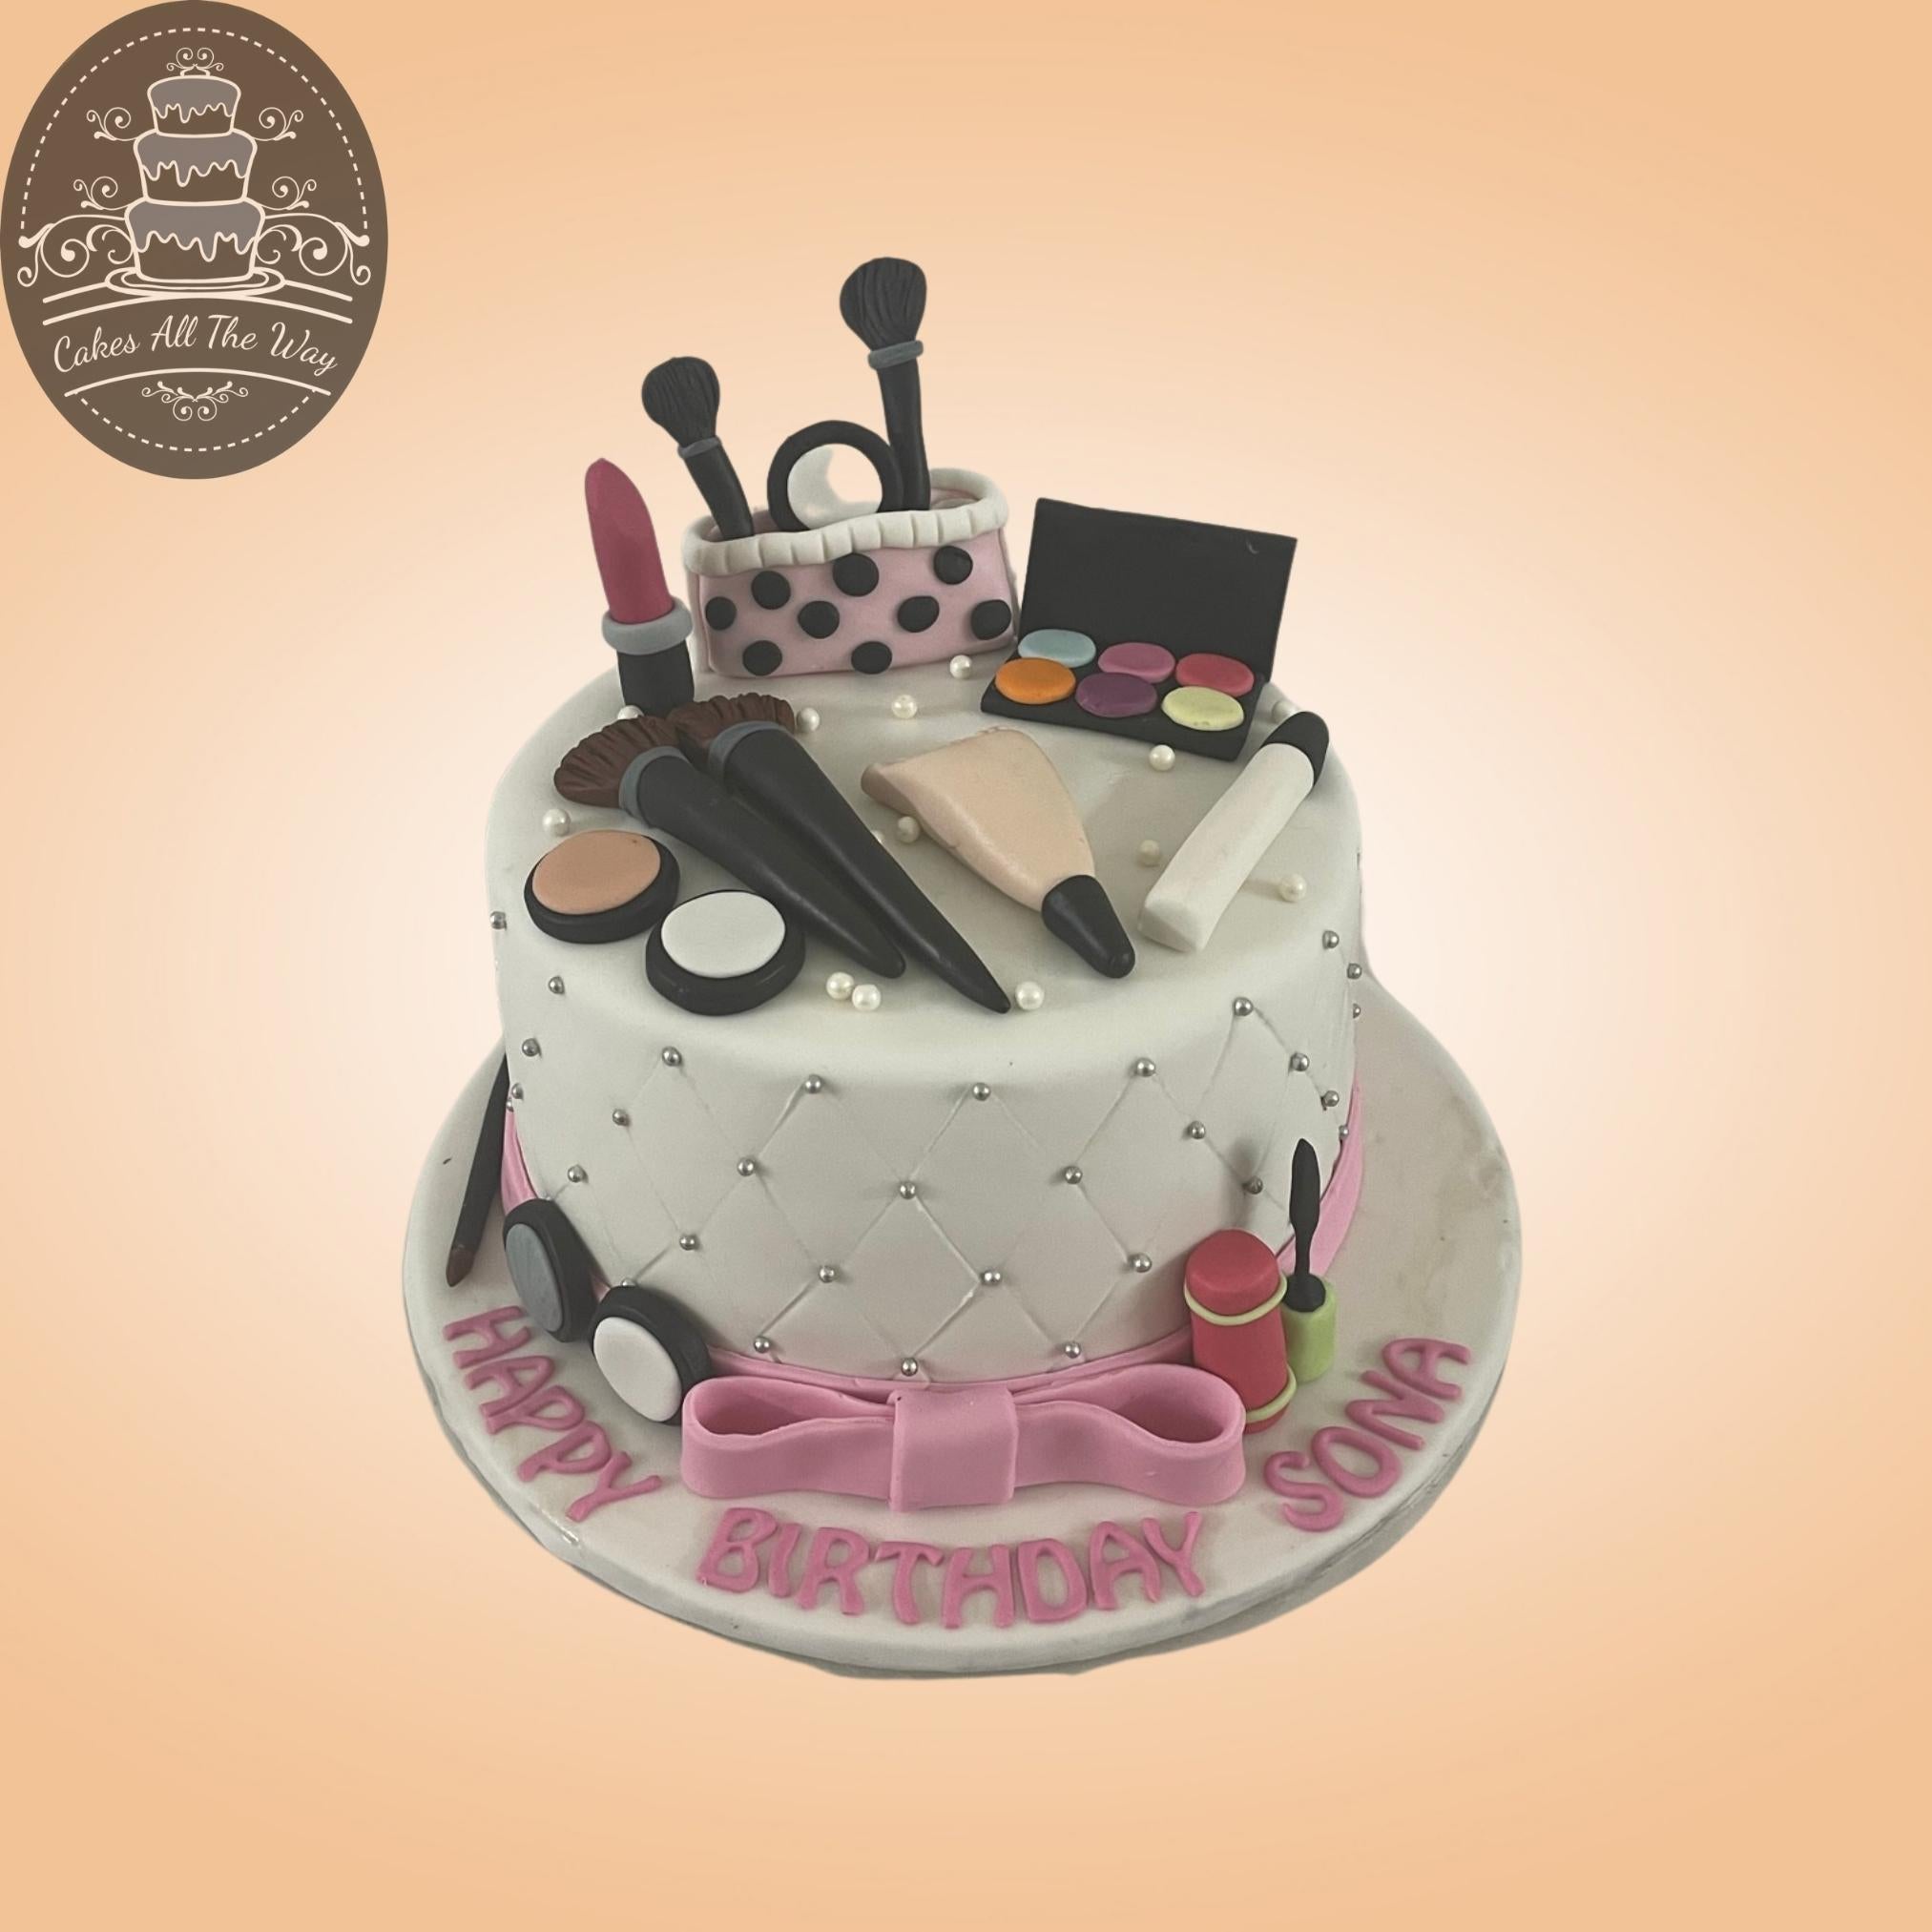 Best Anniversary Cake (work from home) In Pune | Order Online